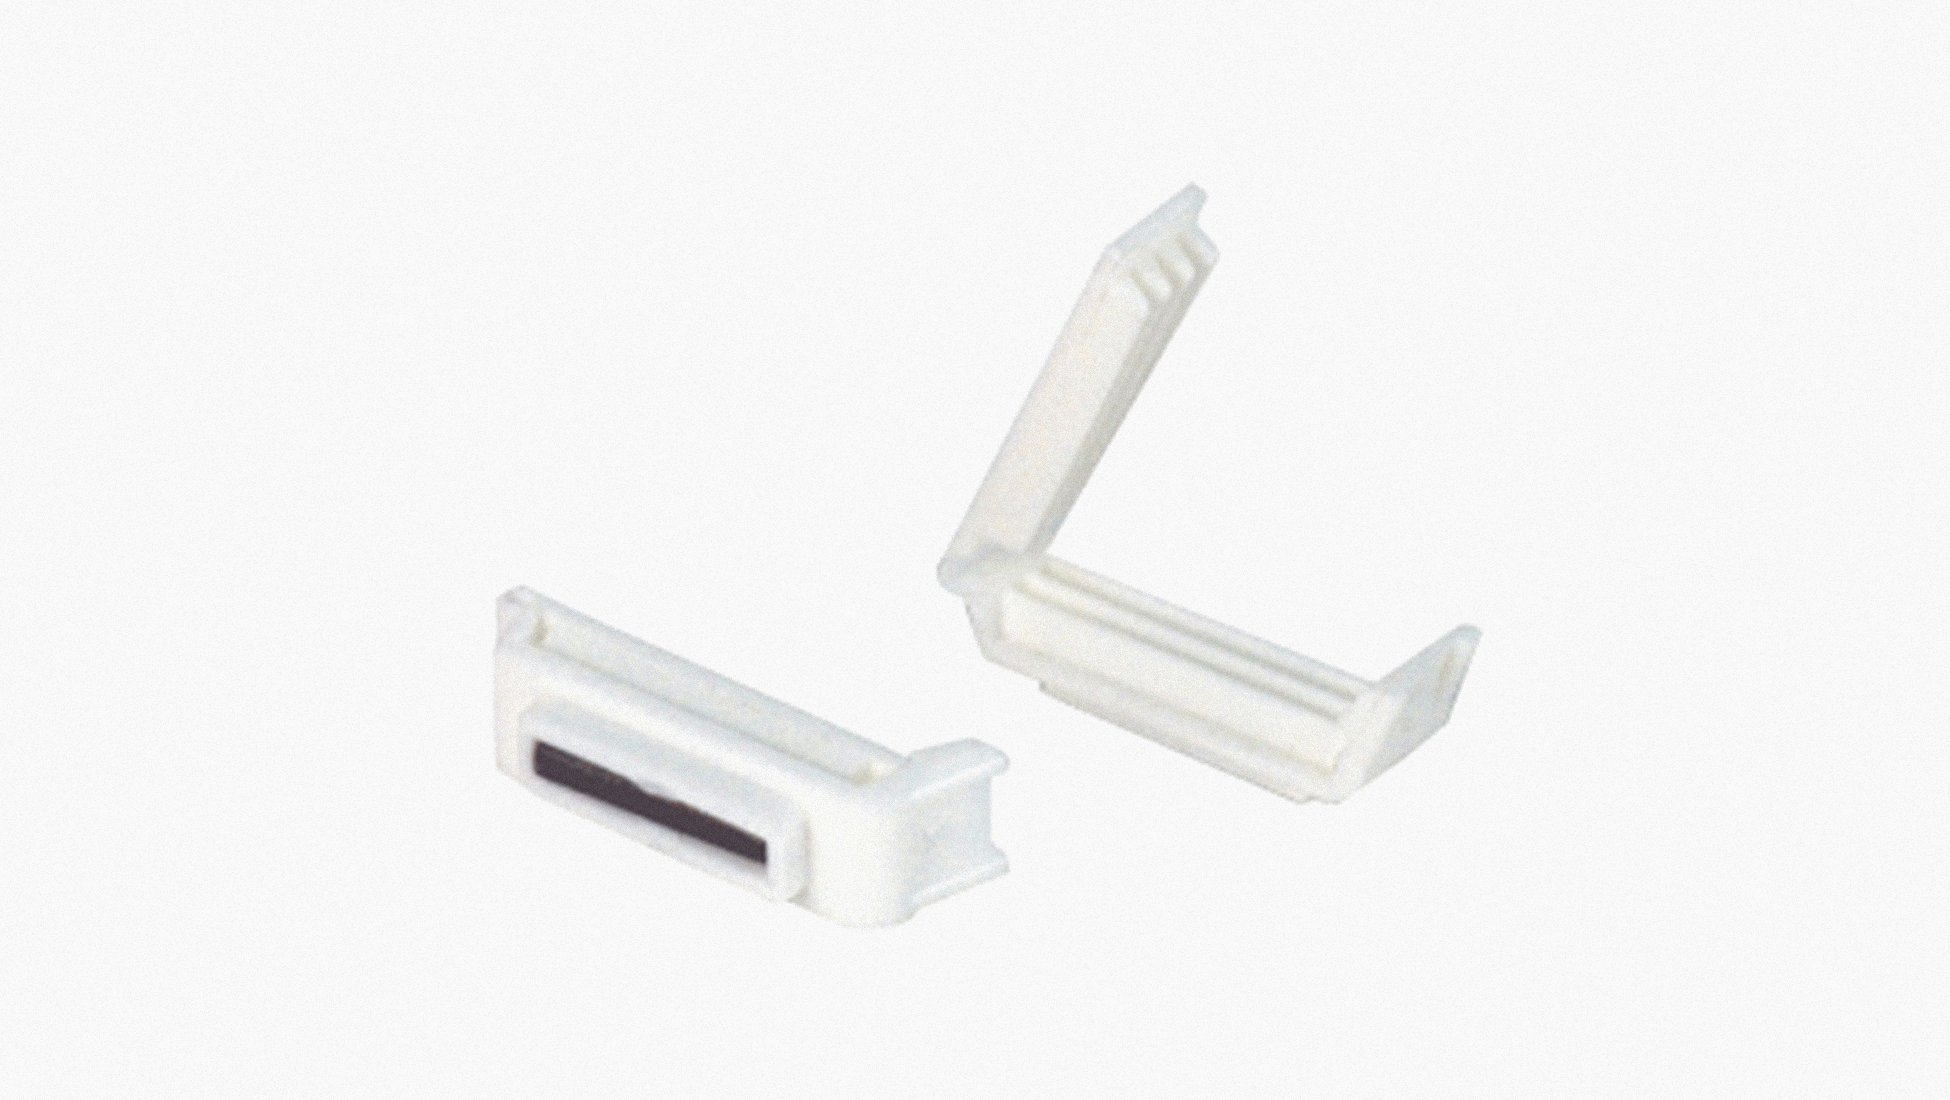 Defimedica_Technologies_Dilaysis_Accessories_Spectra_Por_Tubing_Closures_Weighted_Type_Closure_02